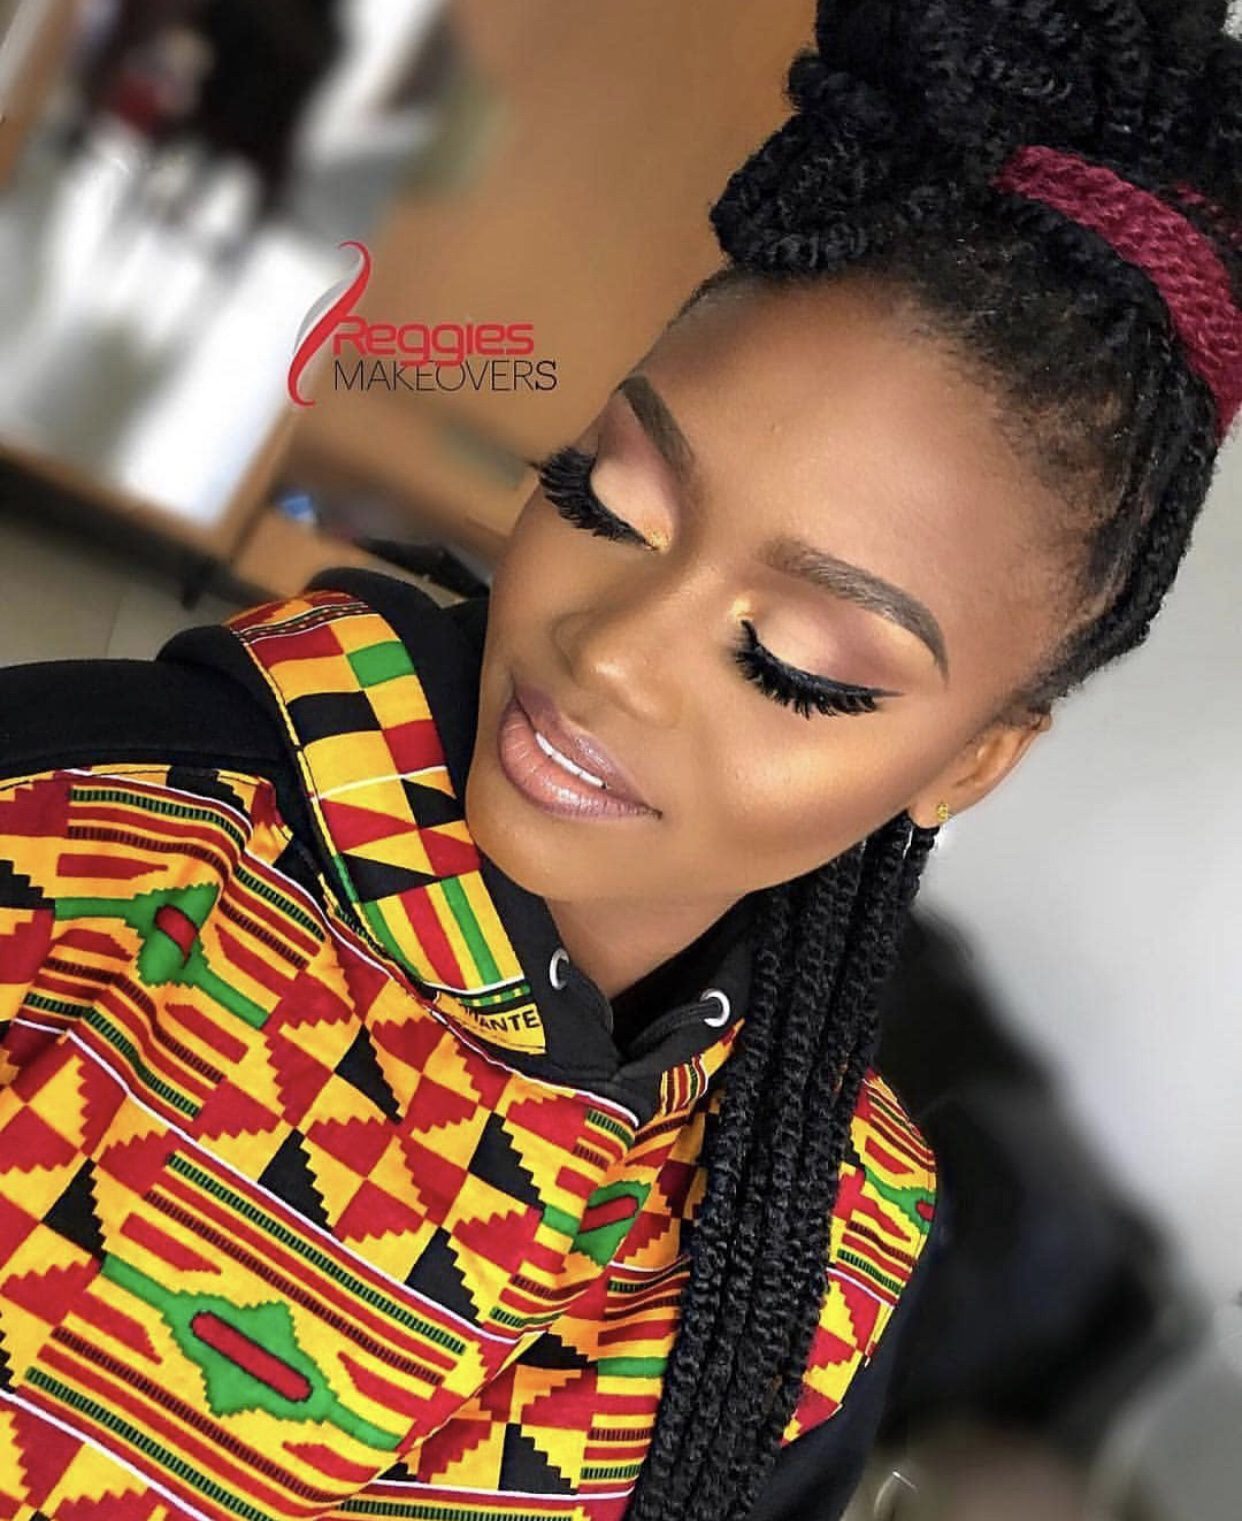 10 songs by eShun you need to listen right now